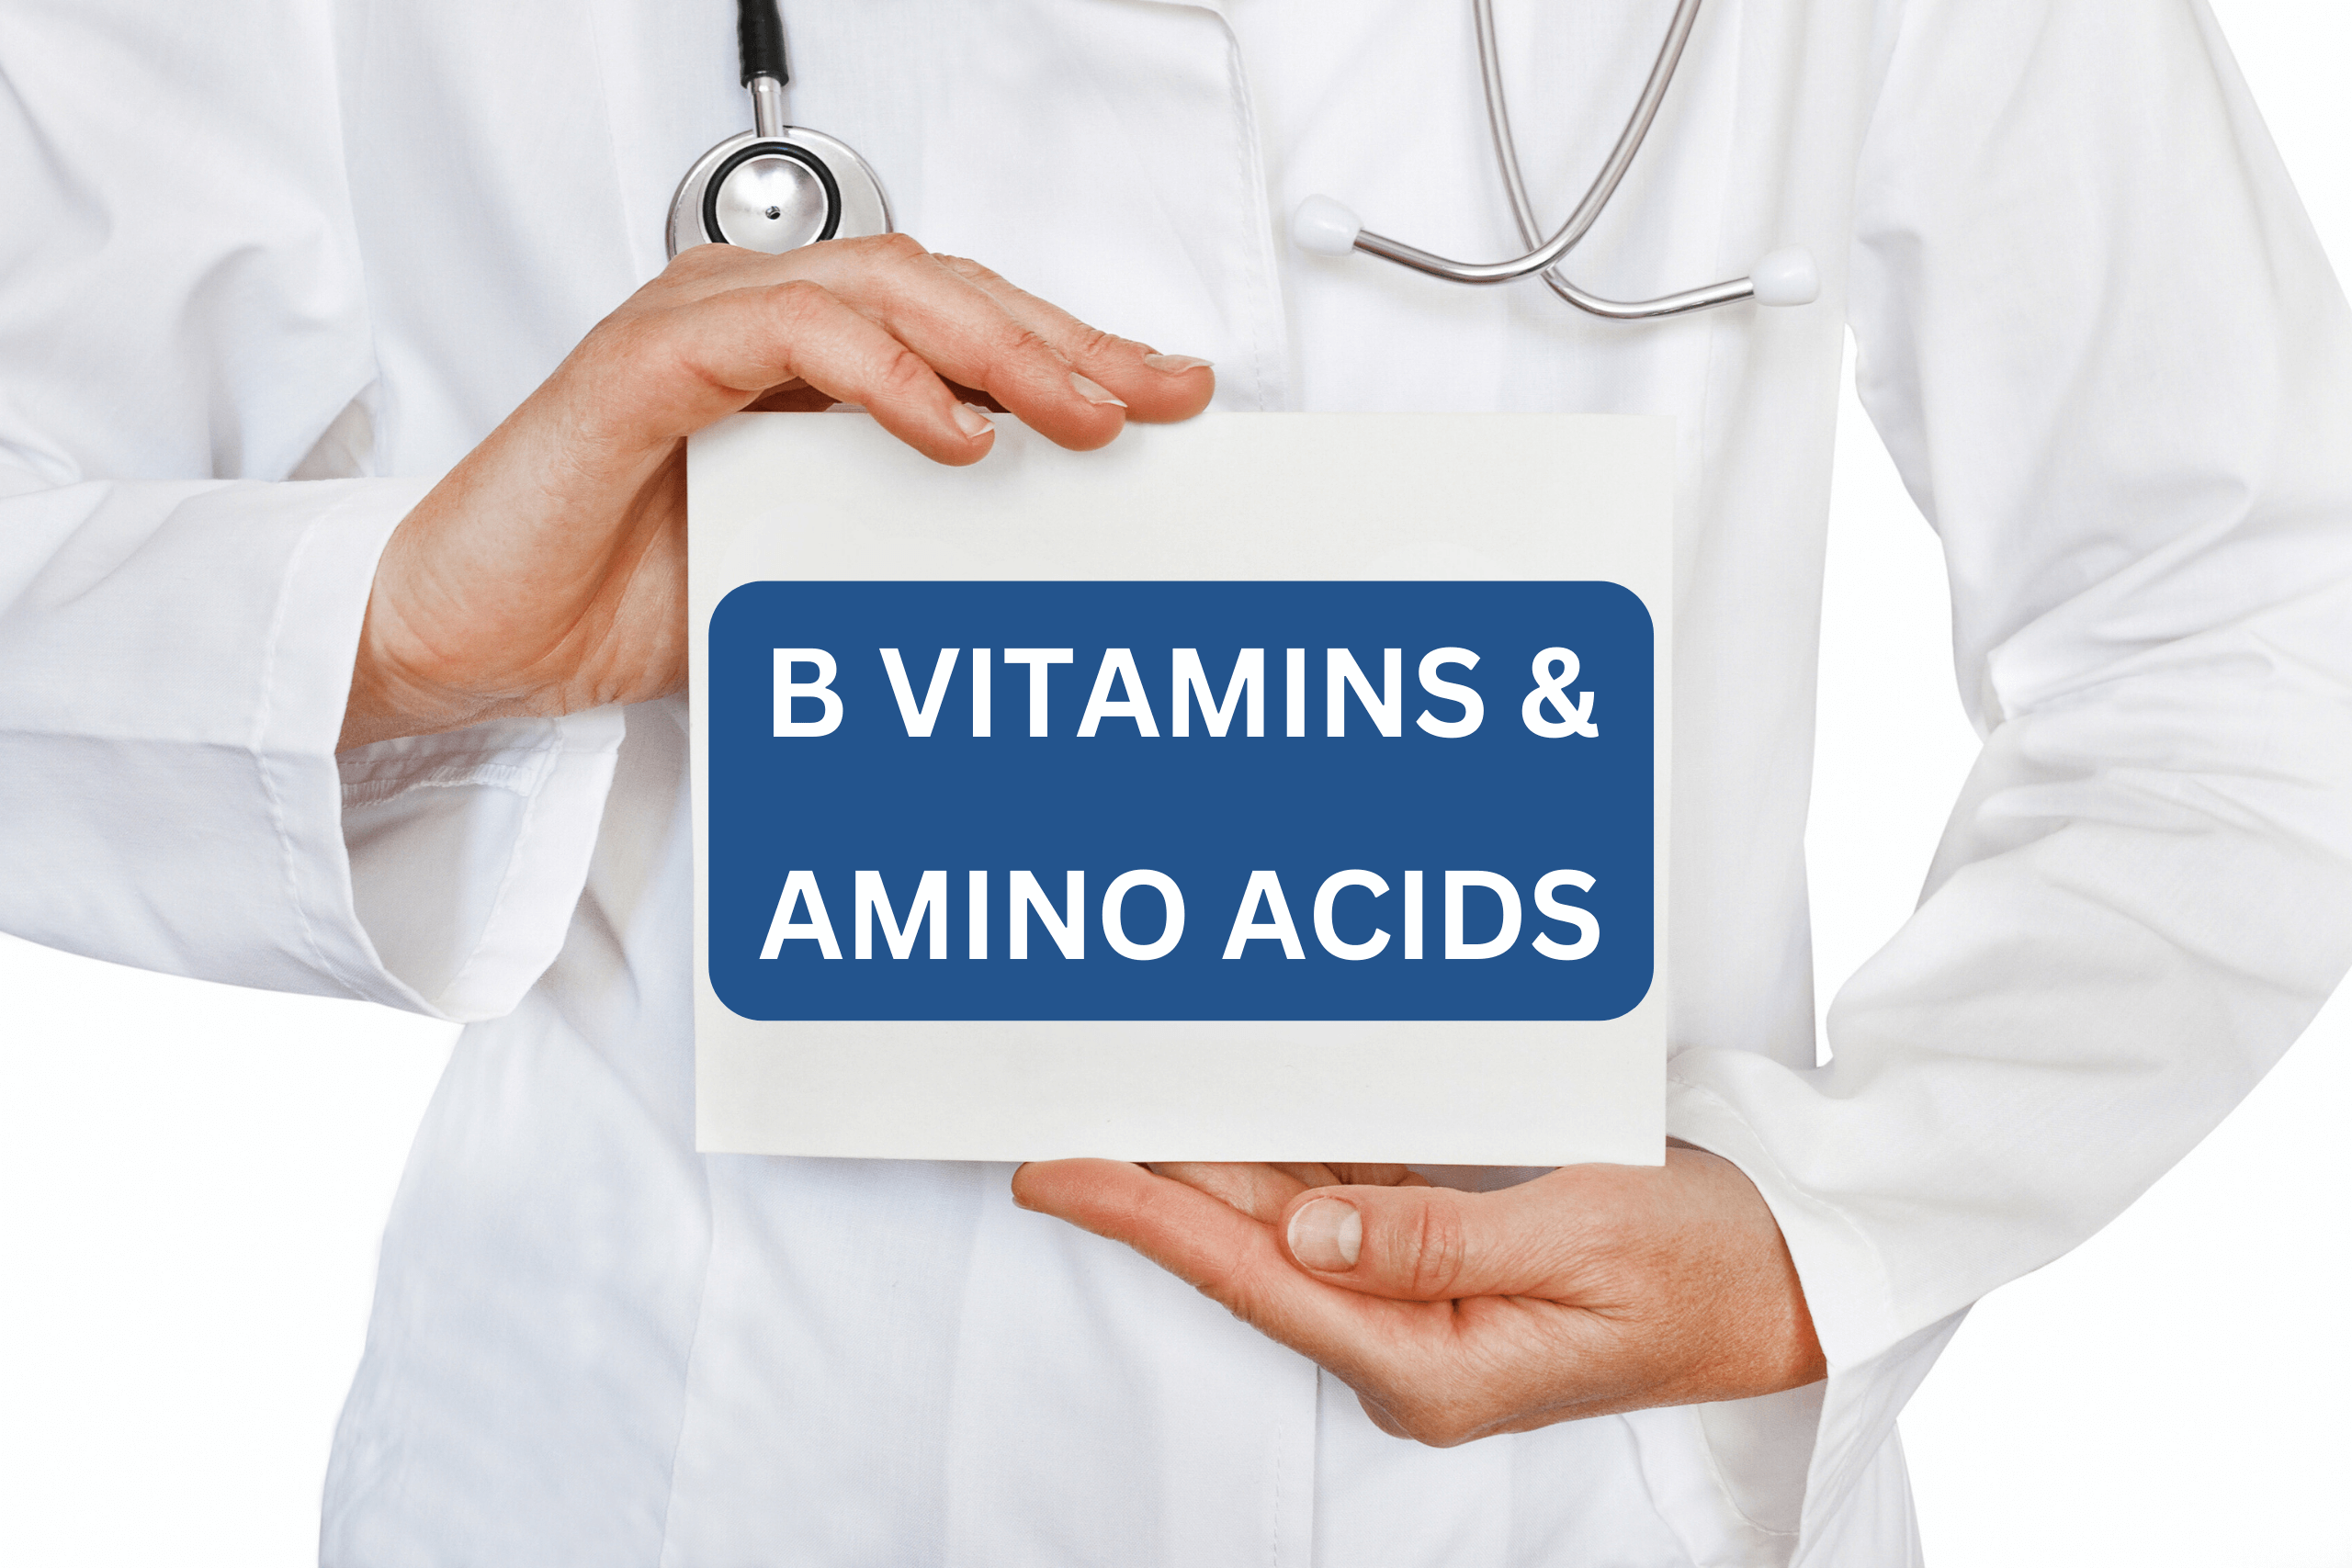 B Vitamins & Amino Acids Aid in Weight Control and Promote Healthy Living